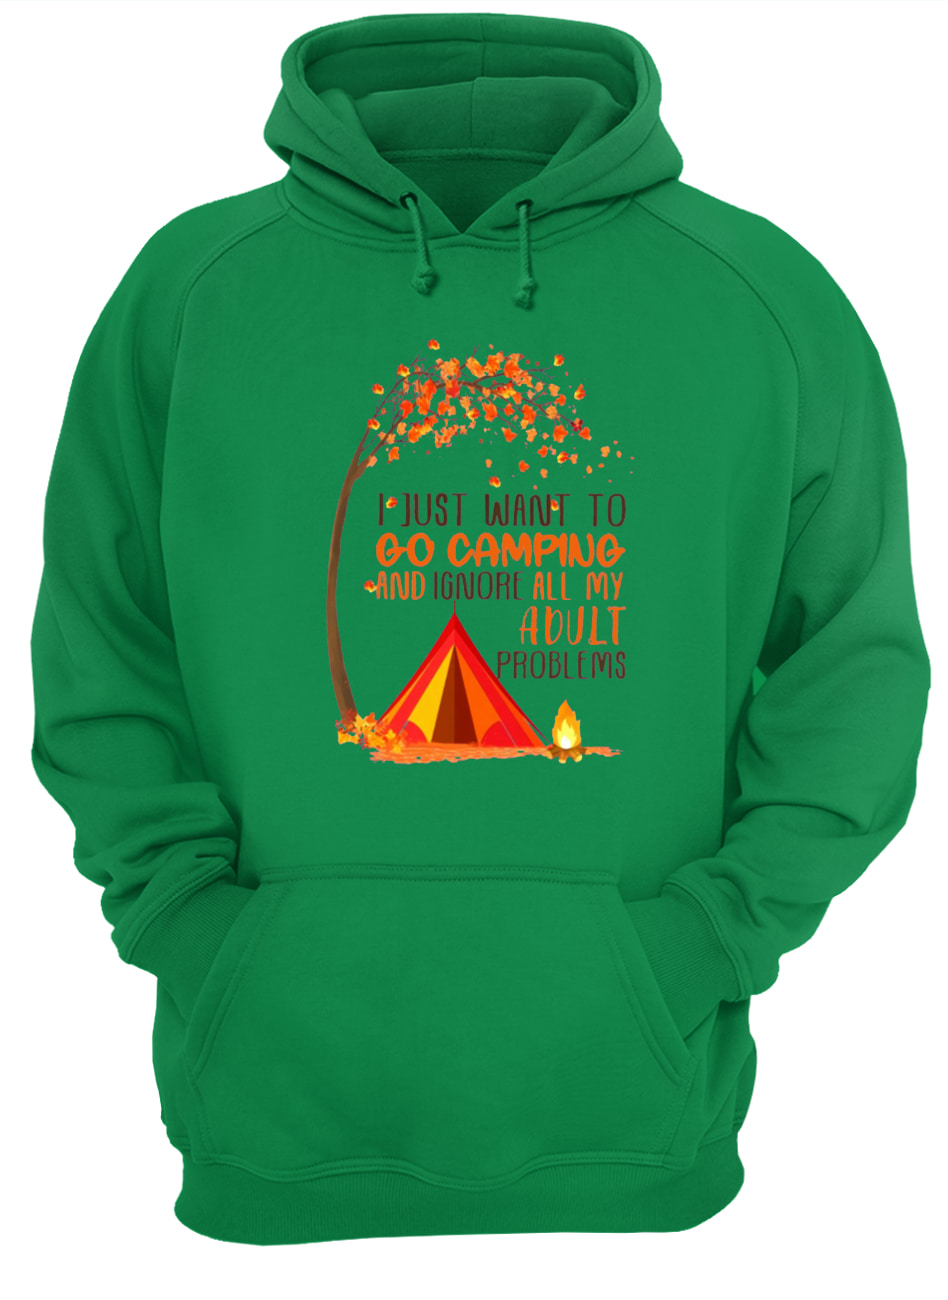 I just want to go camping and ignore all of my adult problems hoodie